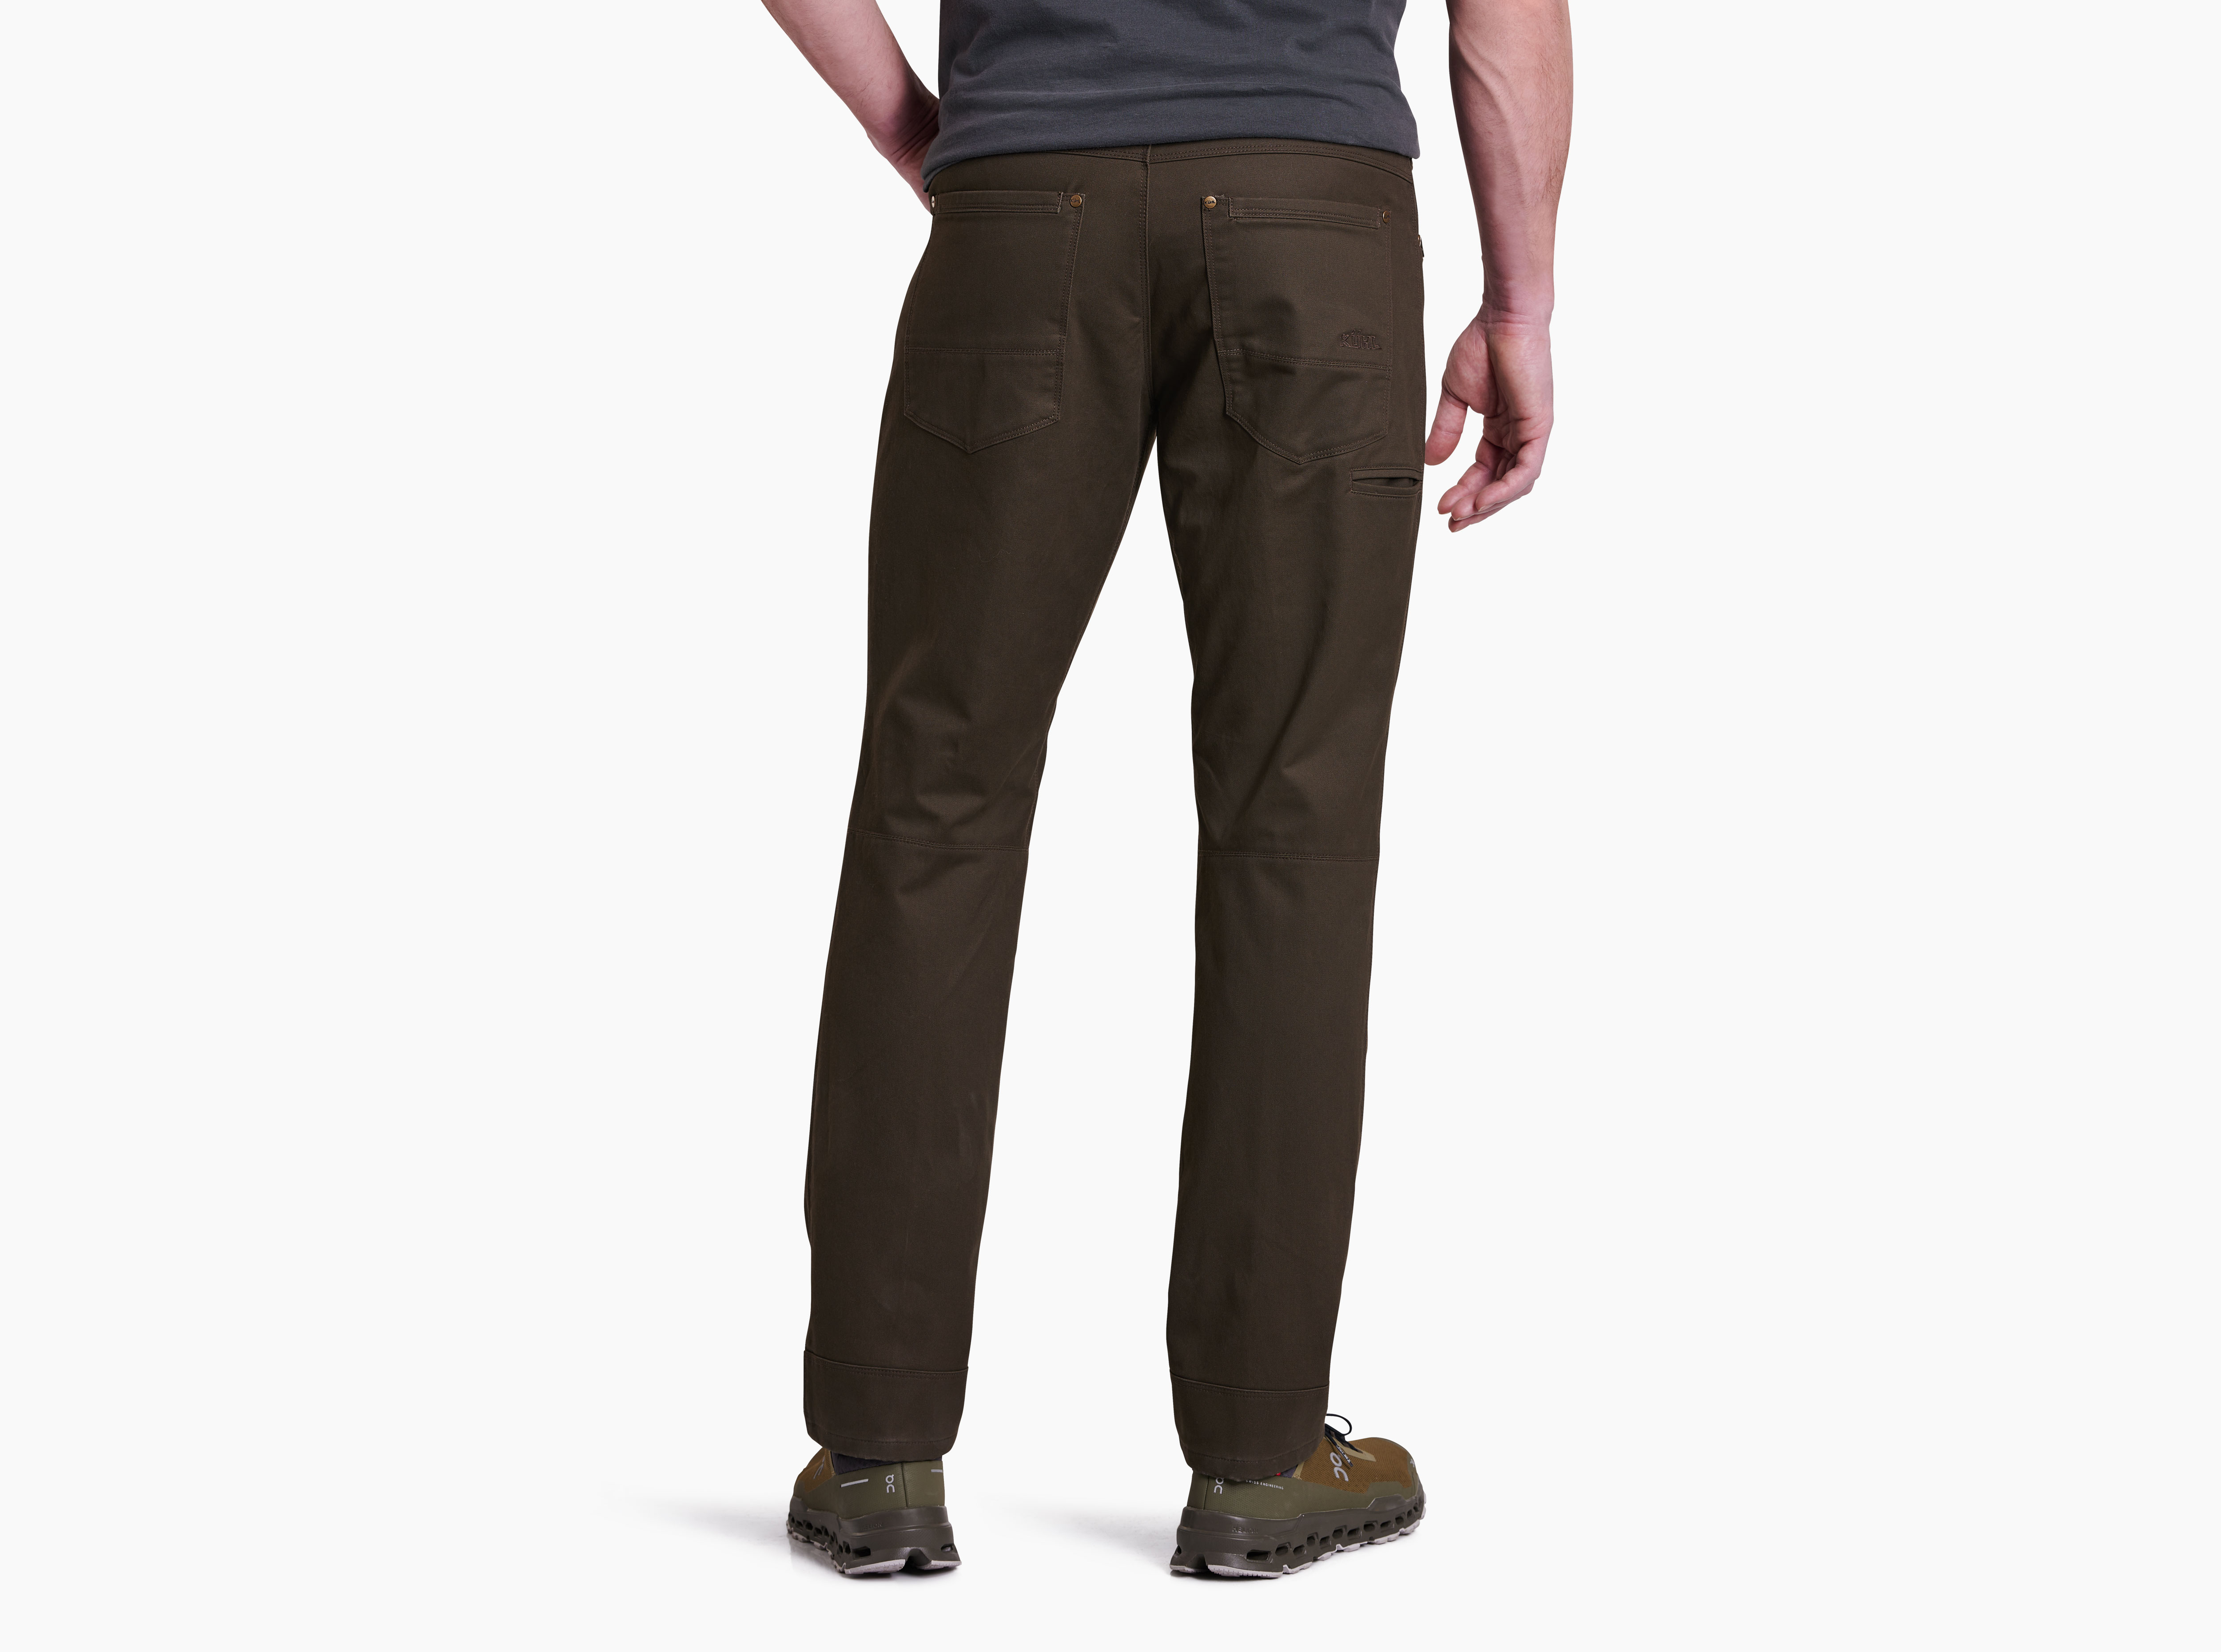 Men's Hot Rydr Pants  Kühl – Adventure Outfitters